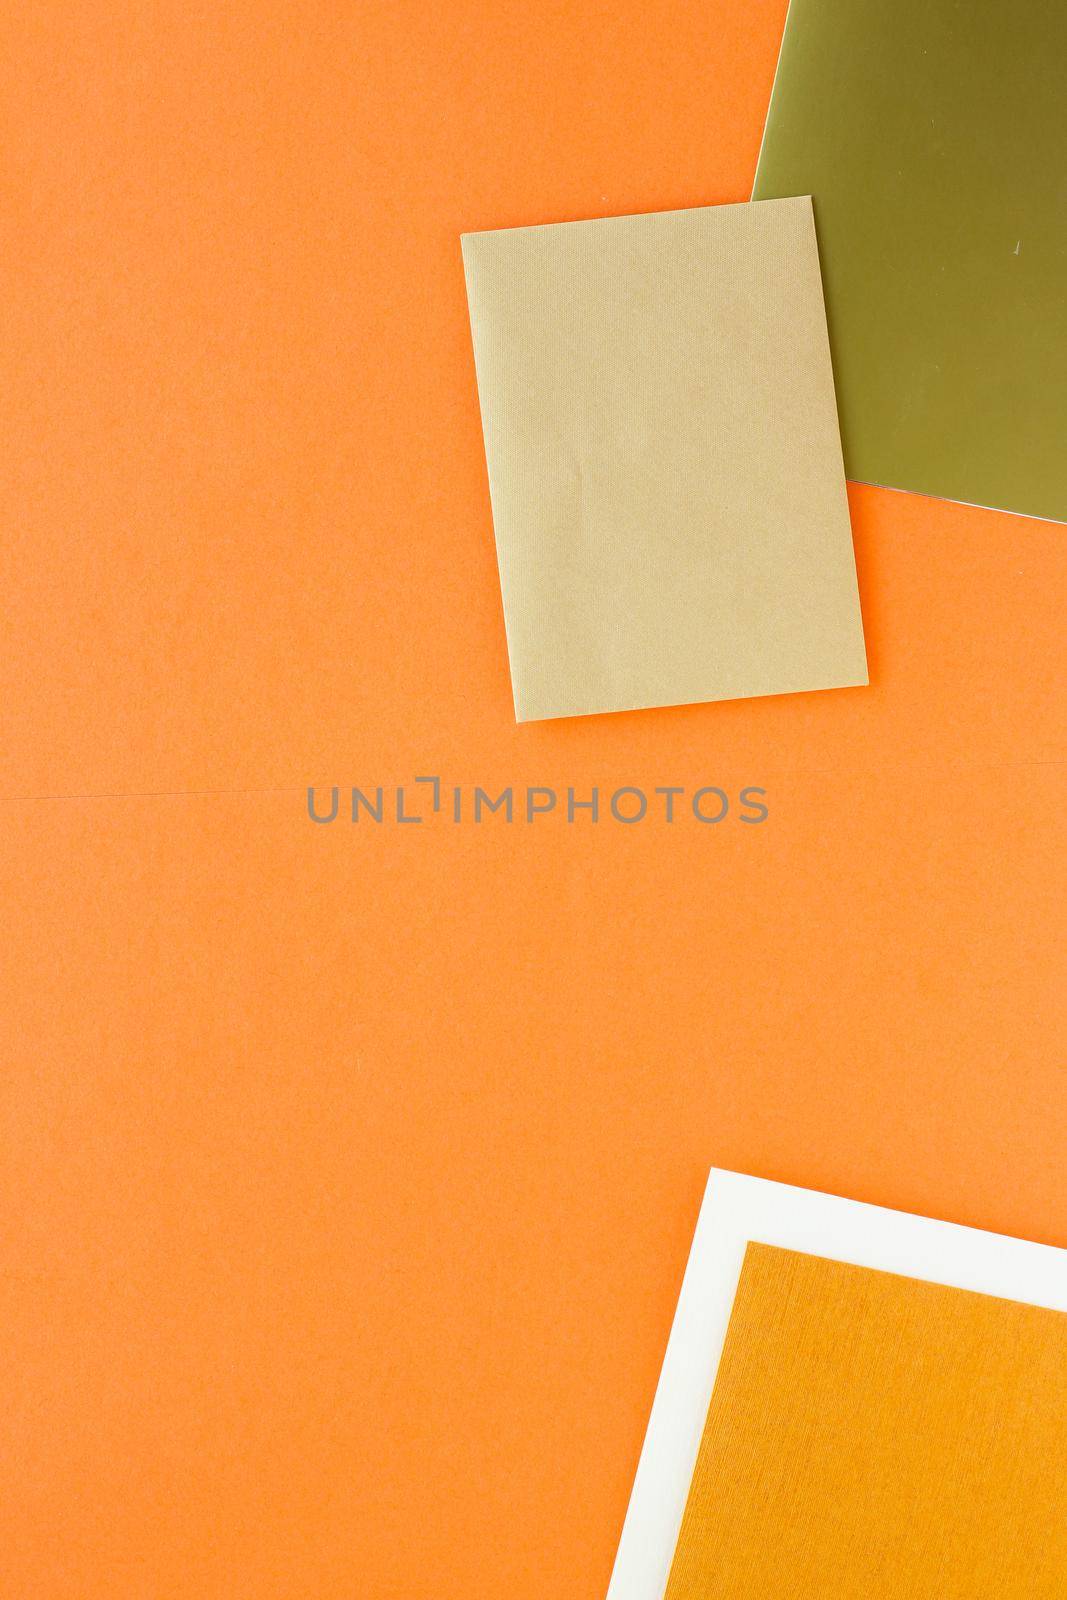 Branding, graphic design and identity template concept - Set of paper stationery for business brand, flatlay mockup